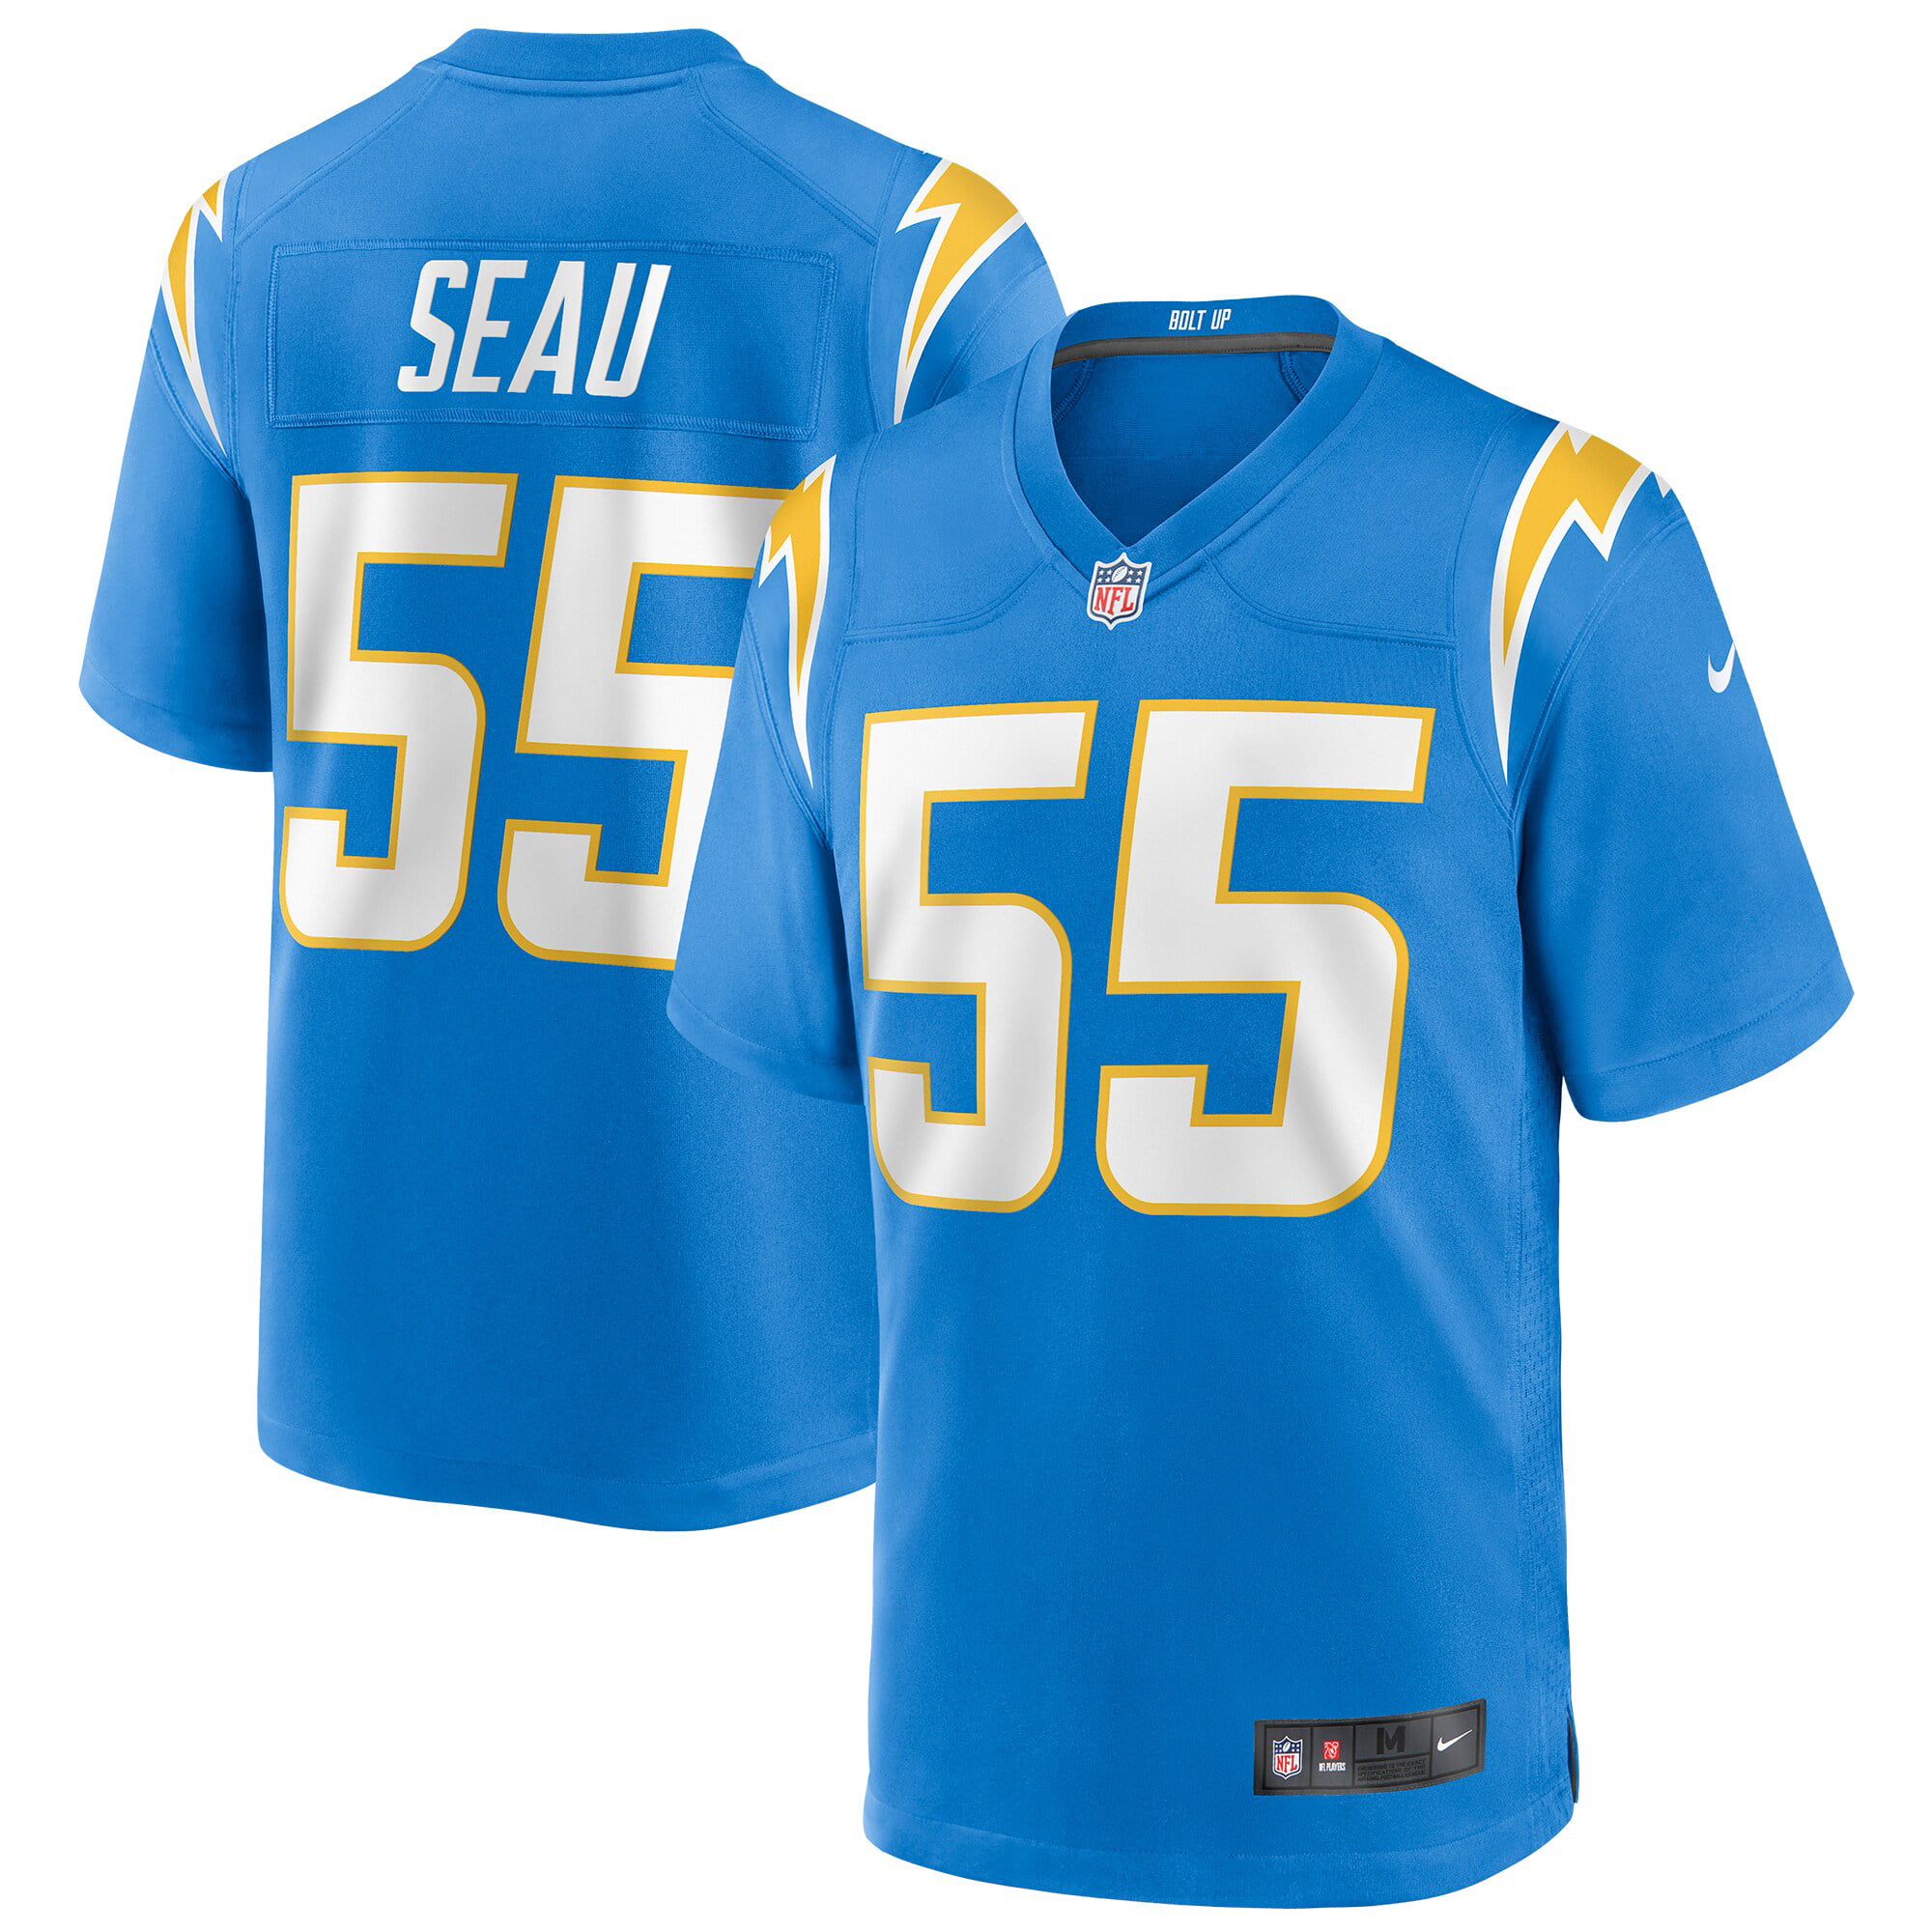 boys chargers jersey